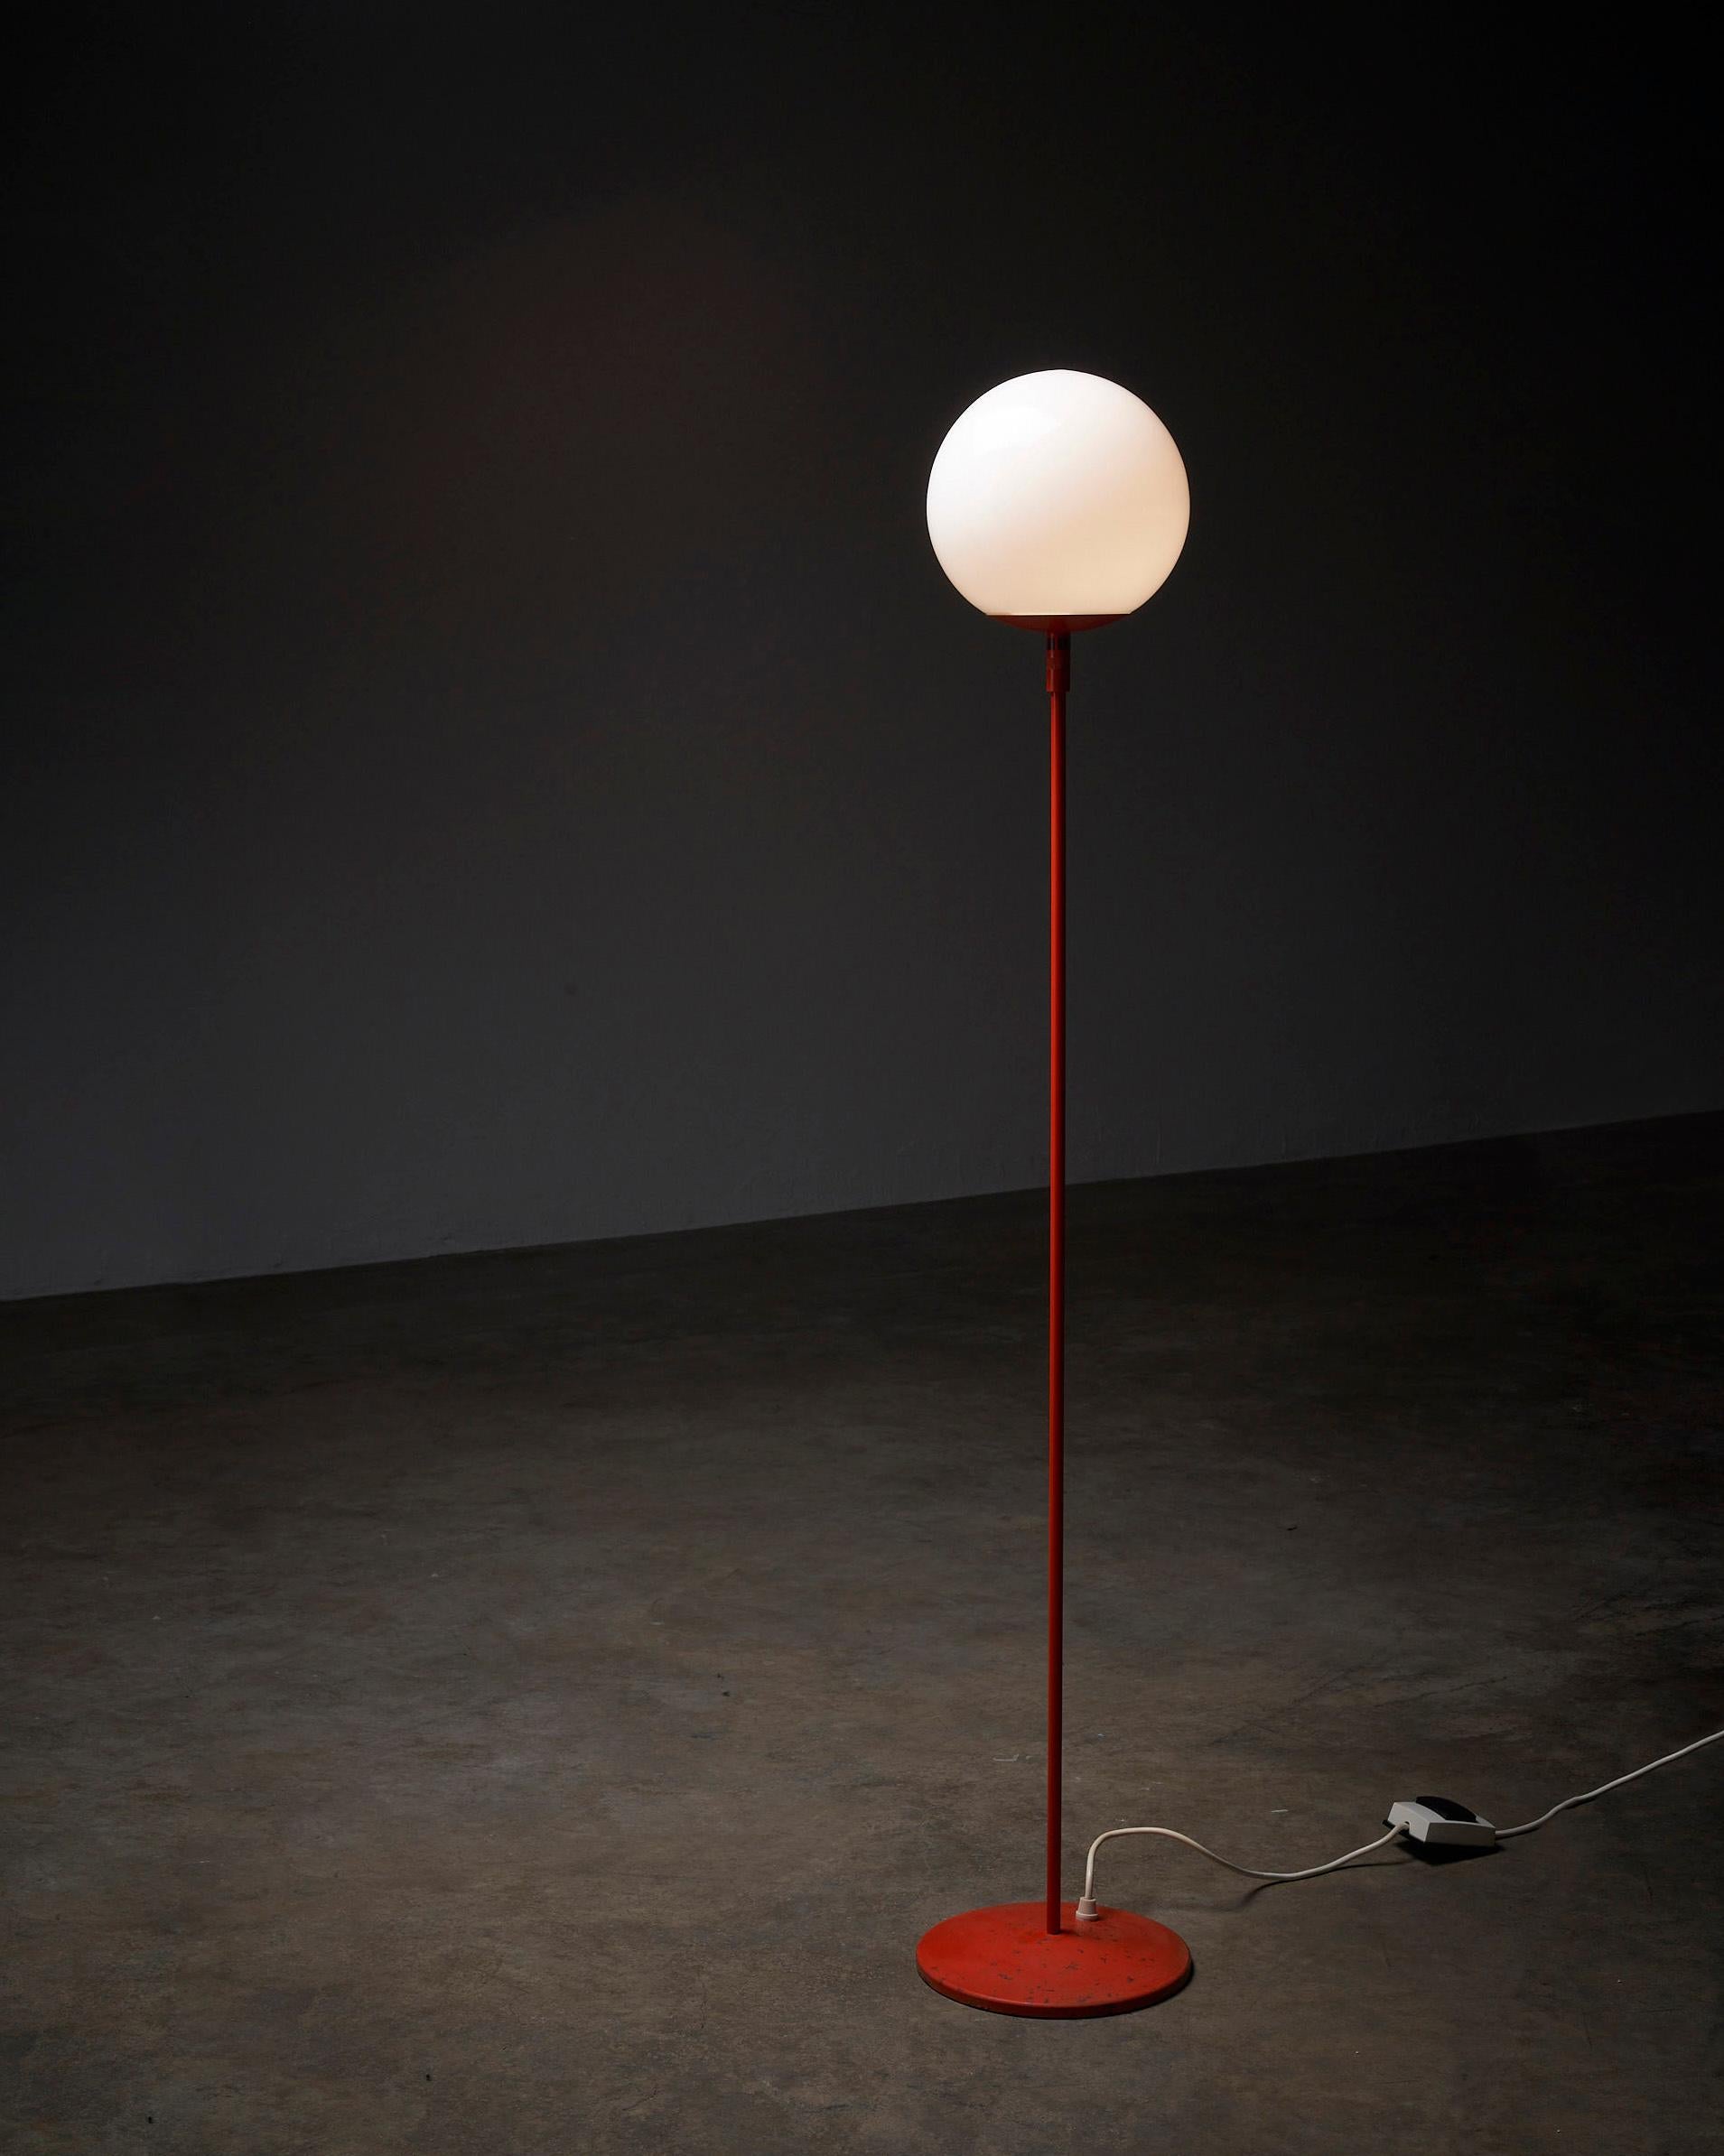 Introducing the Stem Floor Lamp with Glass Sphere, crafted by BAG Turgi, Switzerland. This minimalistic floor lamp showcases a sleek and understated design that effortlessly blends form and function.

The lamp features a thin, orange-colored stem